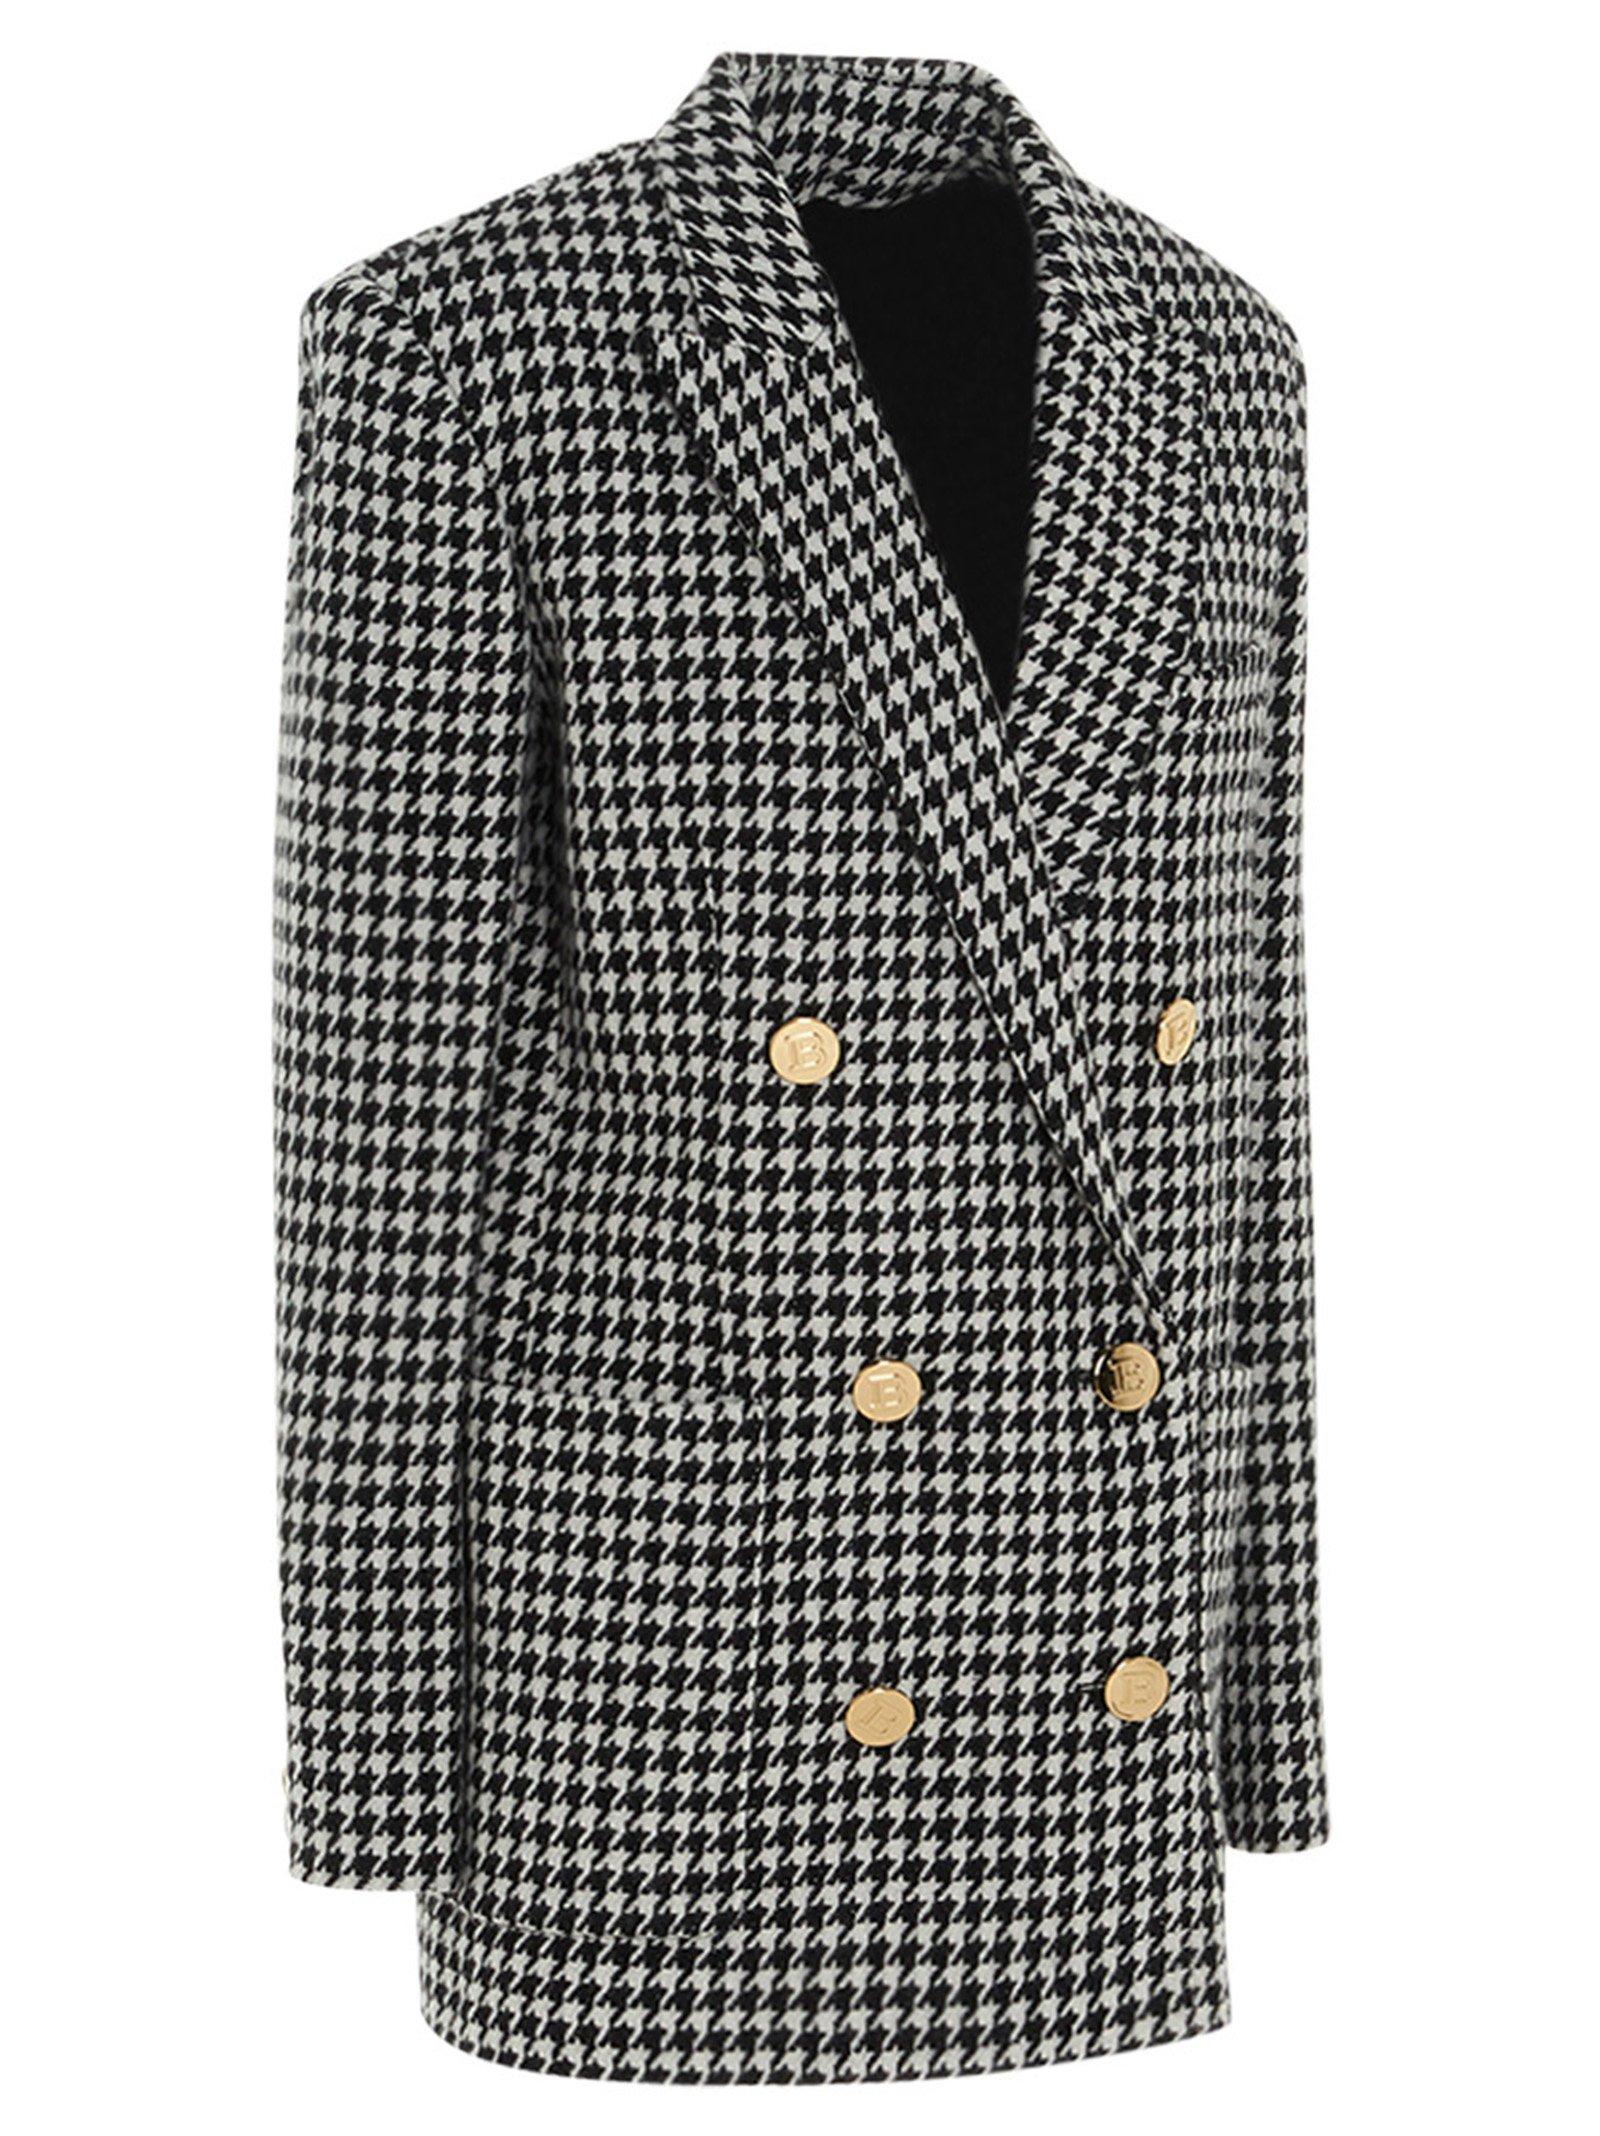 Balmain Wool Double-breasted Houndstooth Blazer in Black - Lyst